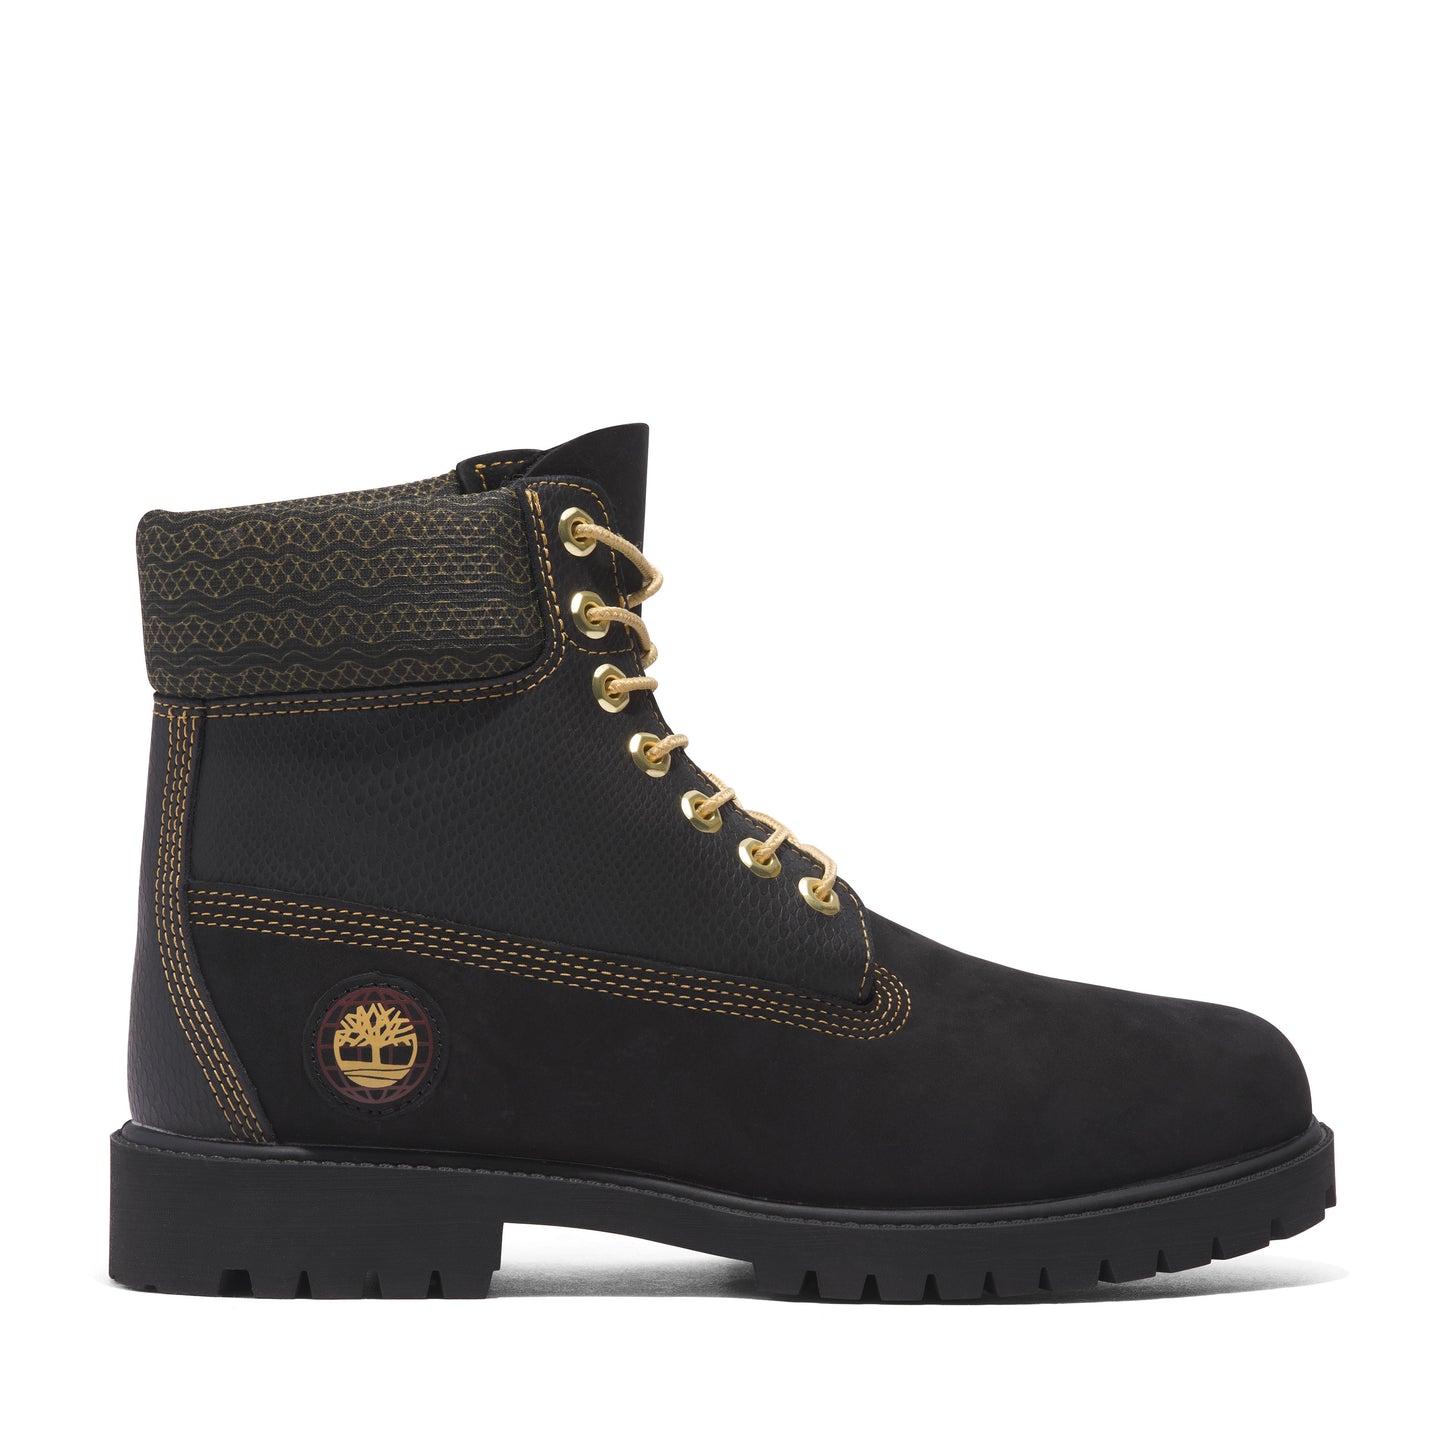 Heritage 6inch Wp Boot Black